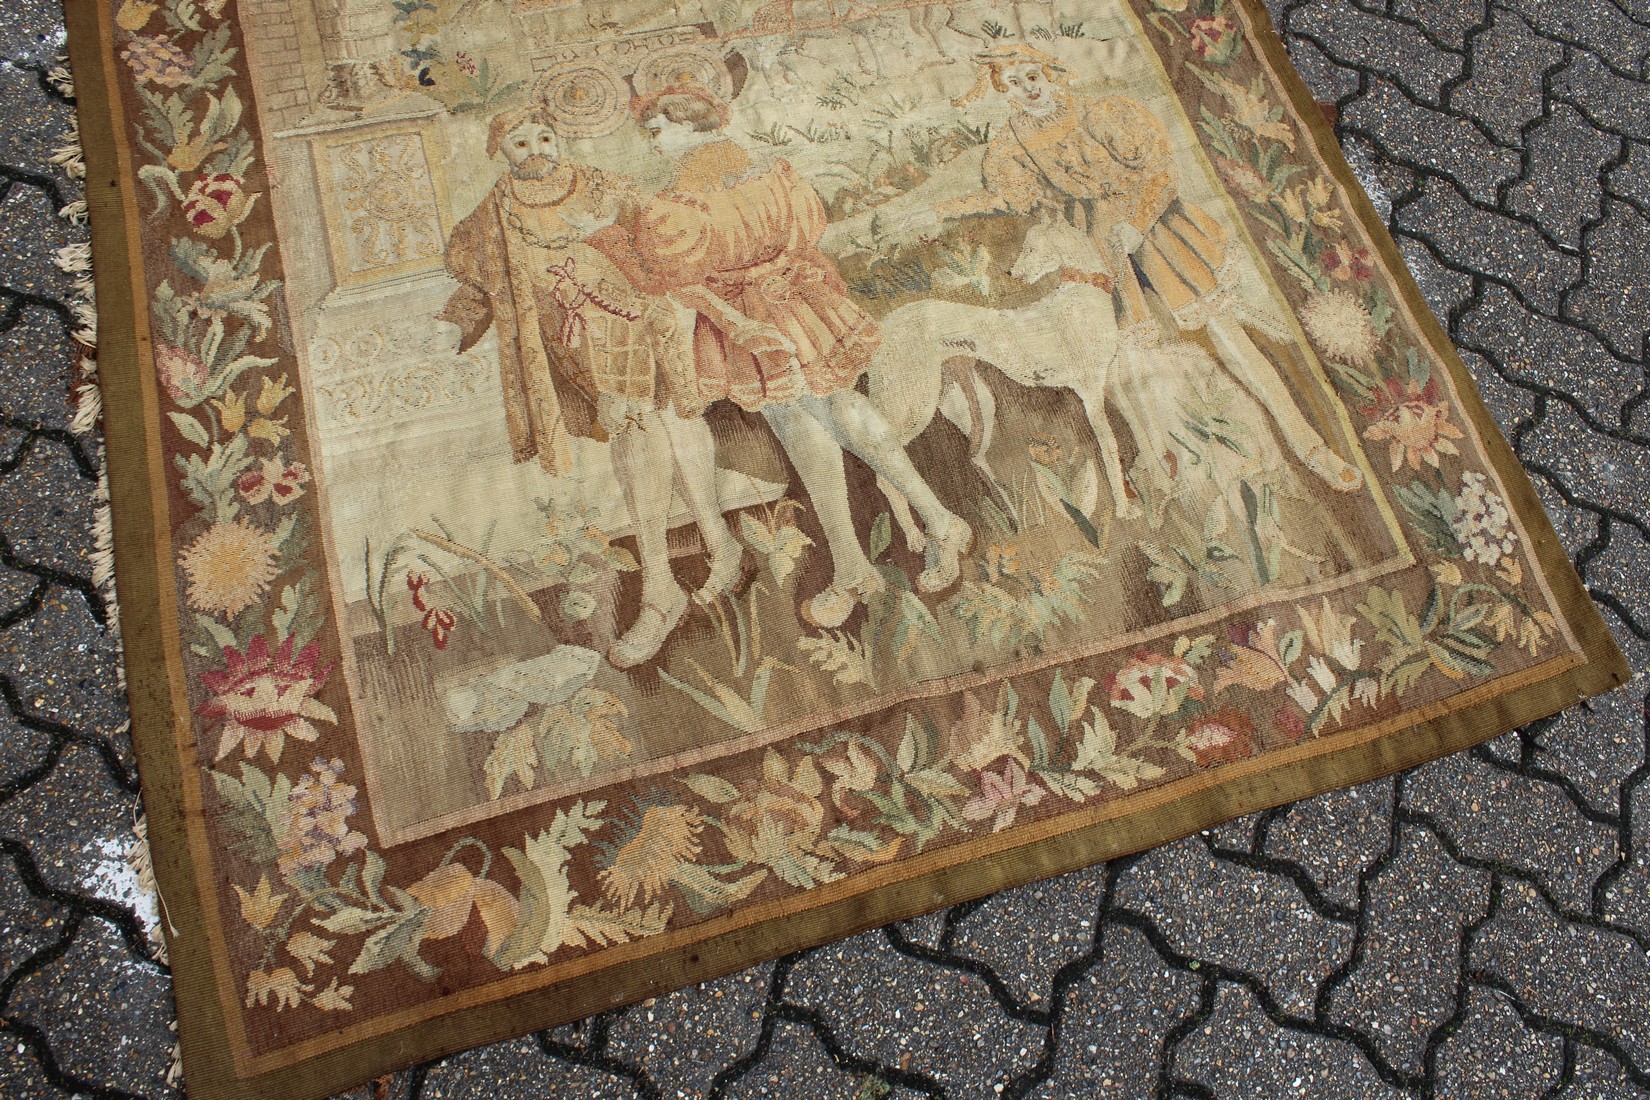 A GOOD 18TH CENTURY FRENCH TAPESTRY decorated with many figures within a floral border. 6ft high x - Image 5 of 9